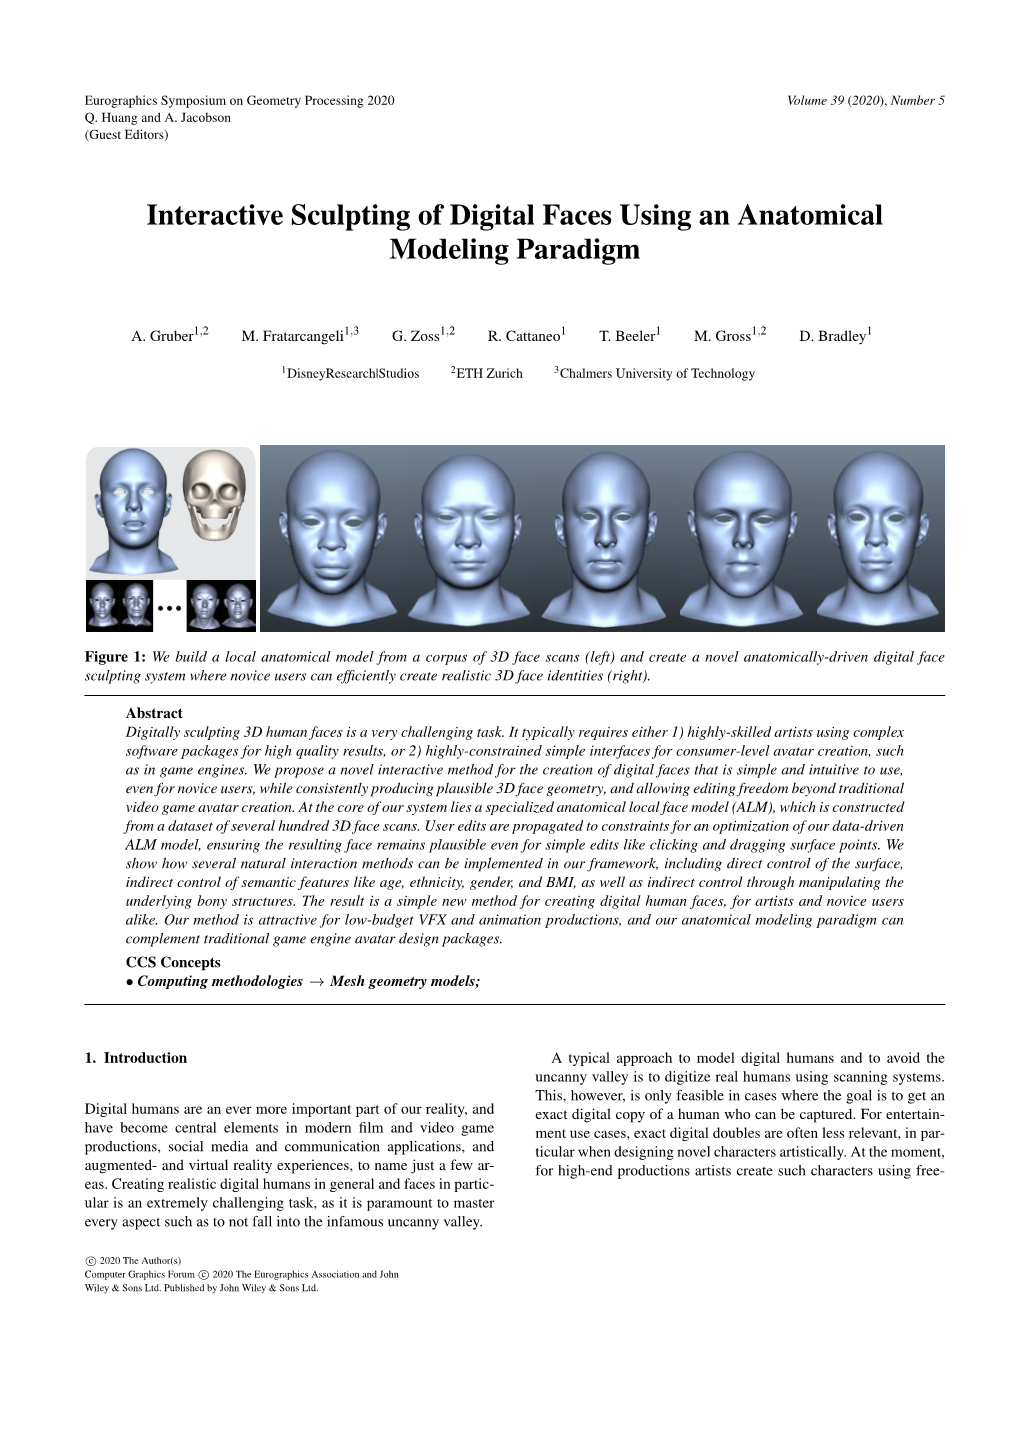 Interactive Sculpting of Digital Faces Using an Anatomical Modeling Paradigm